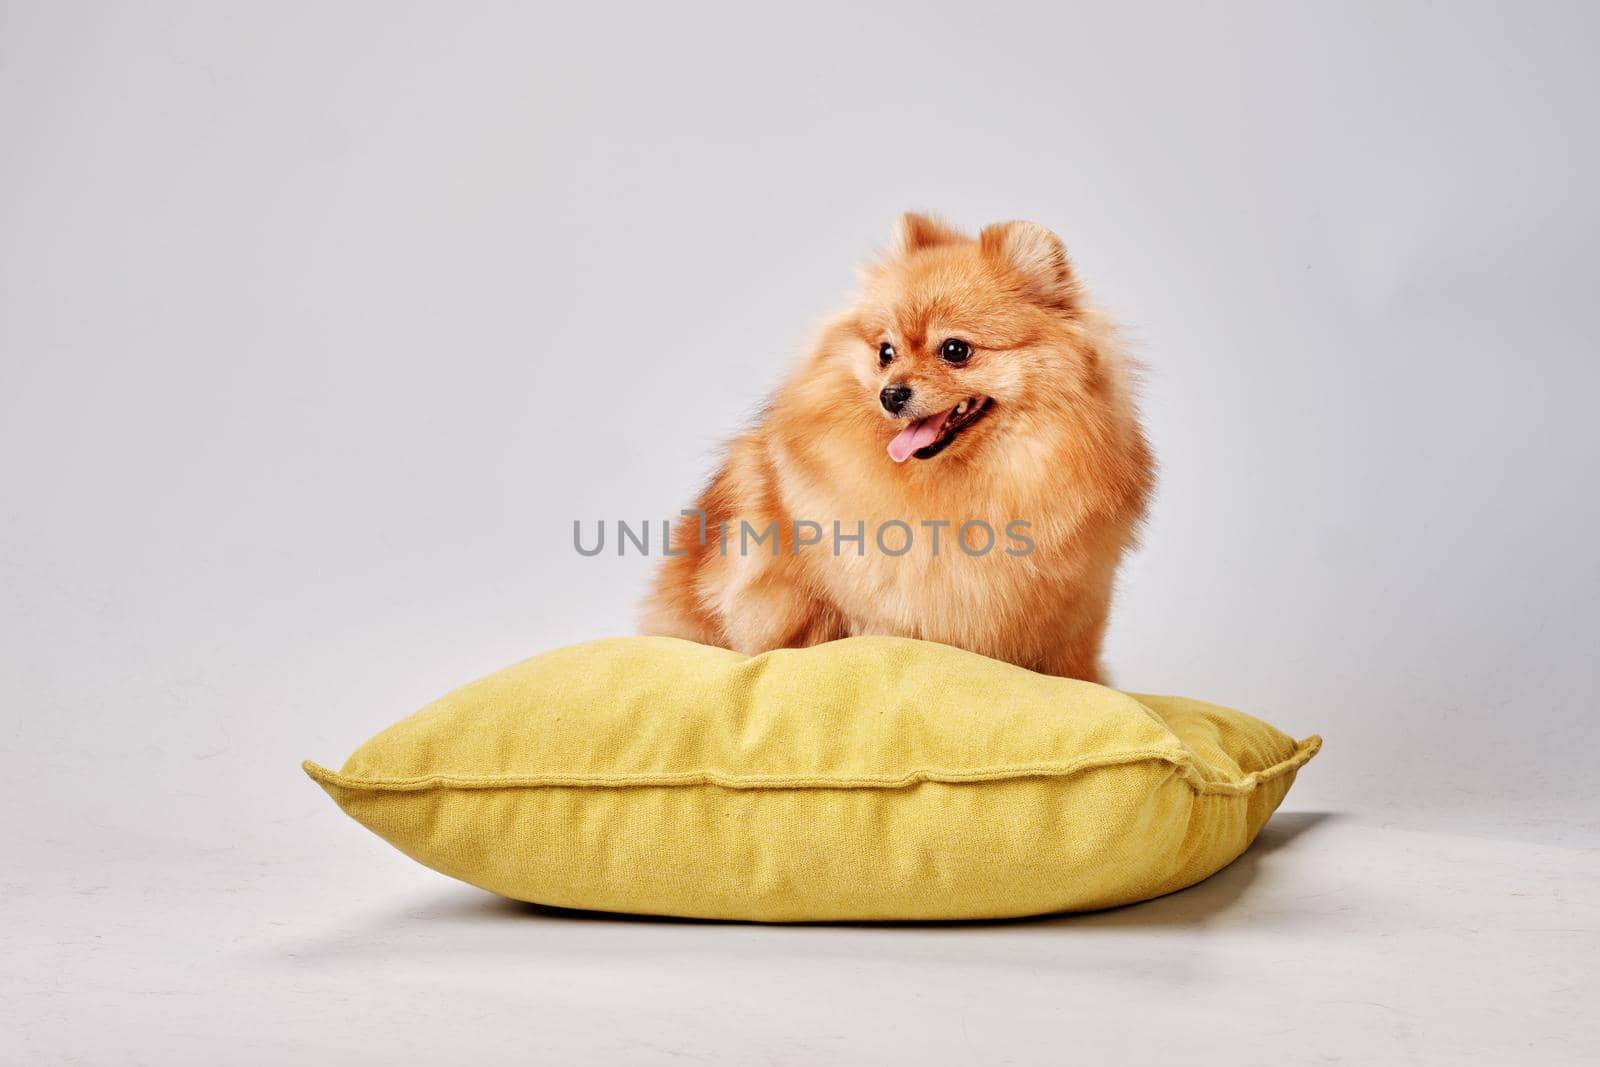 A happy pomeranian sits on a yellow pillow on a gray background.